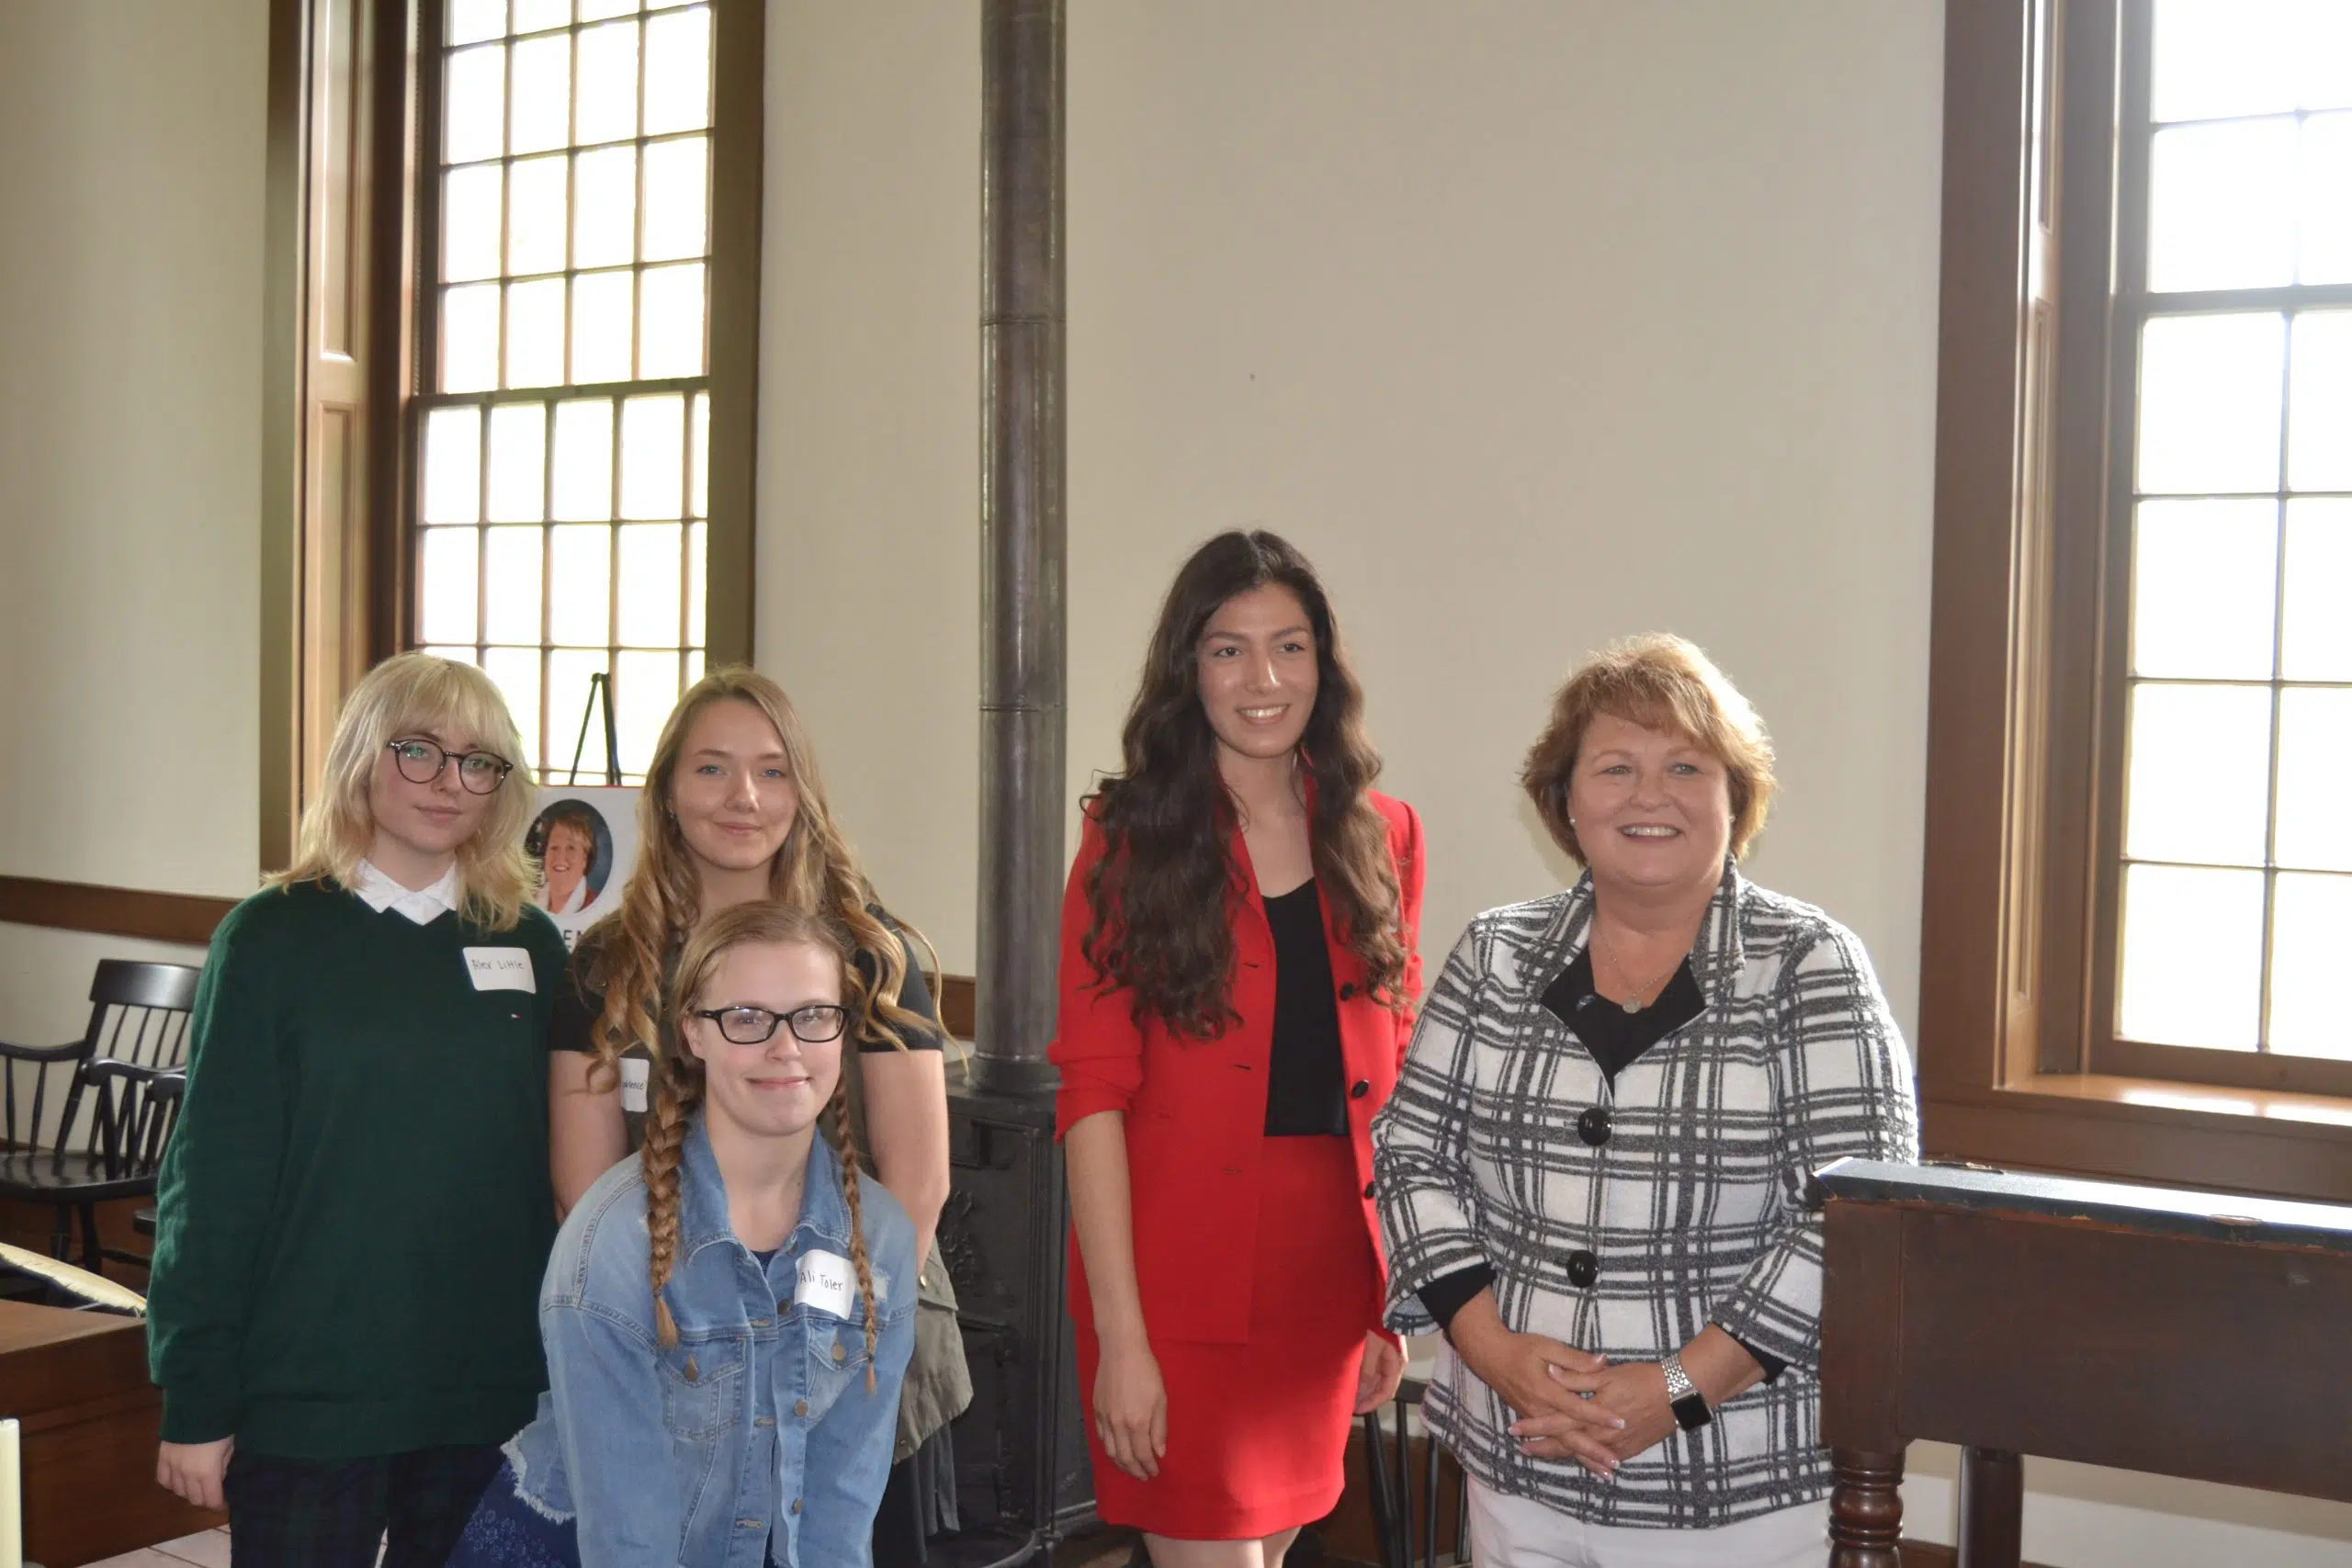 Youth Advisory Council for State Sen Terri Bryant holds Spring Meeting at Vandalia Statehouse